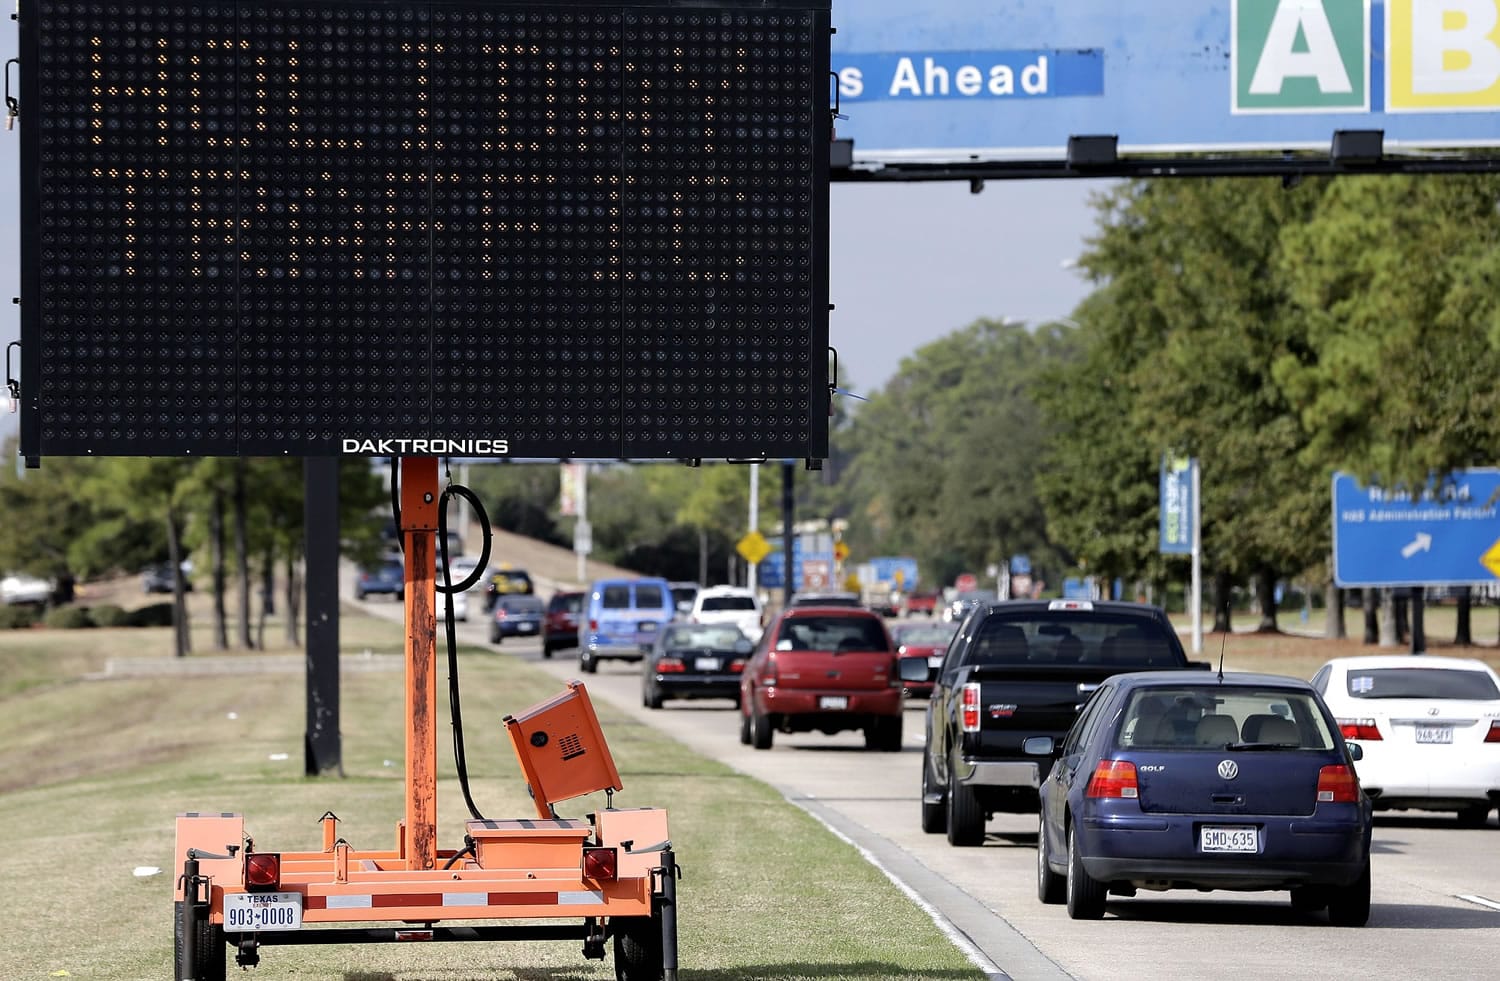 A sign alerts travelers to expect holiday traffic at George Bush Intercontinental Airport in Houston.